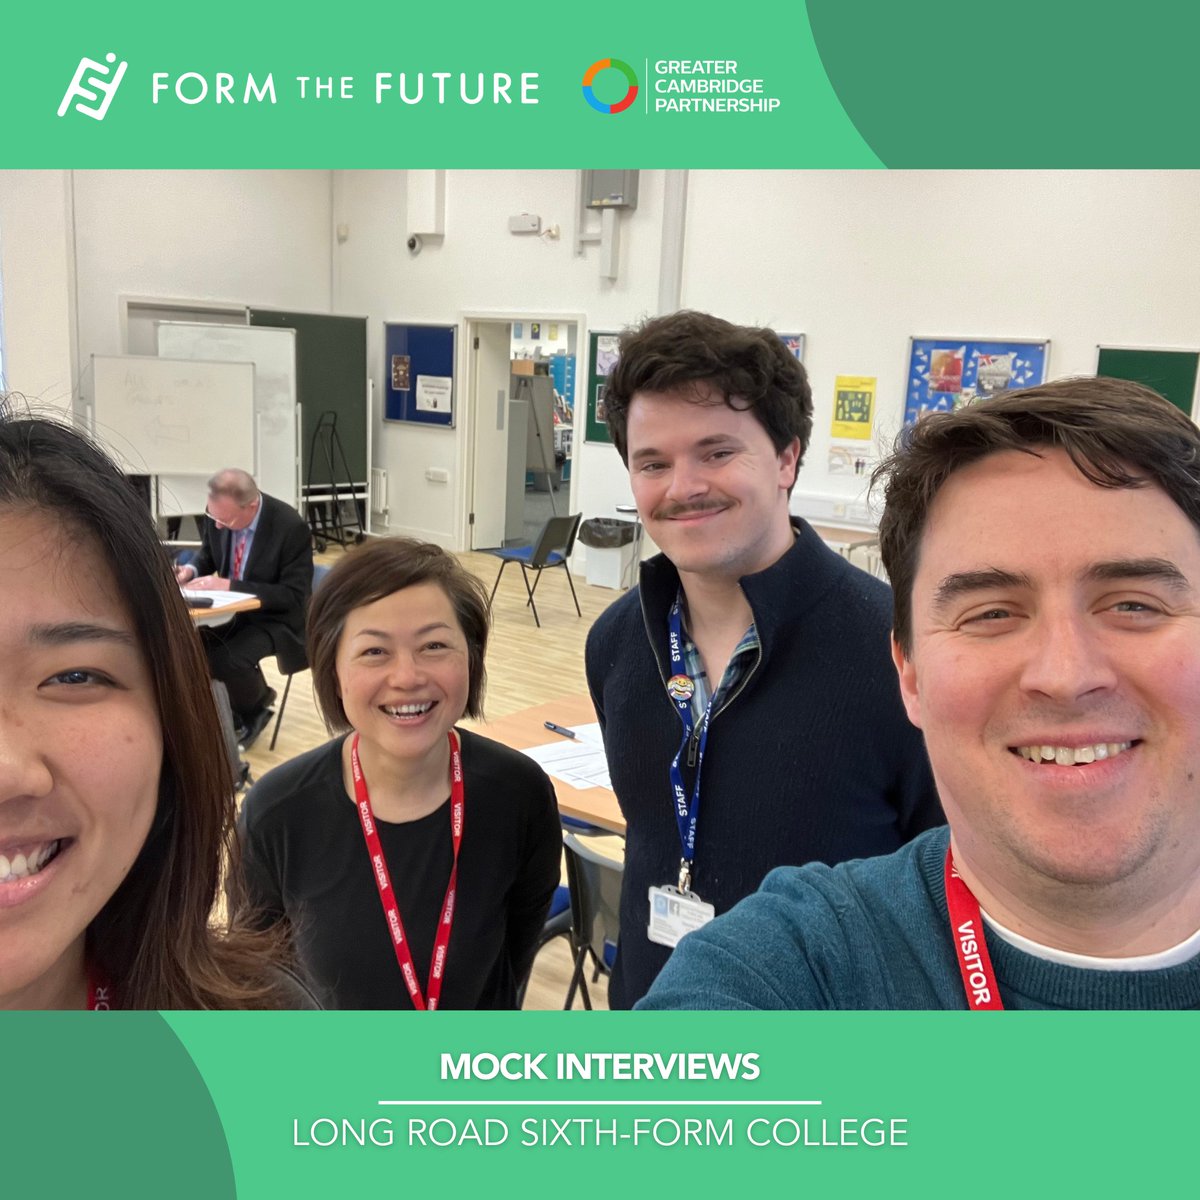 Yesterday we delivered Mock Interviews at @LR6FC. These are a great chance for students to be exposed to an interview situation, learn what they feel like & get an idea of the type of questions asked. Could you volunteer with us? Find out more 👉 lnkd.in/d9NmRJy